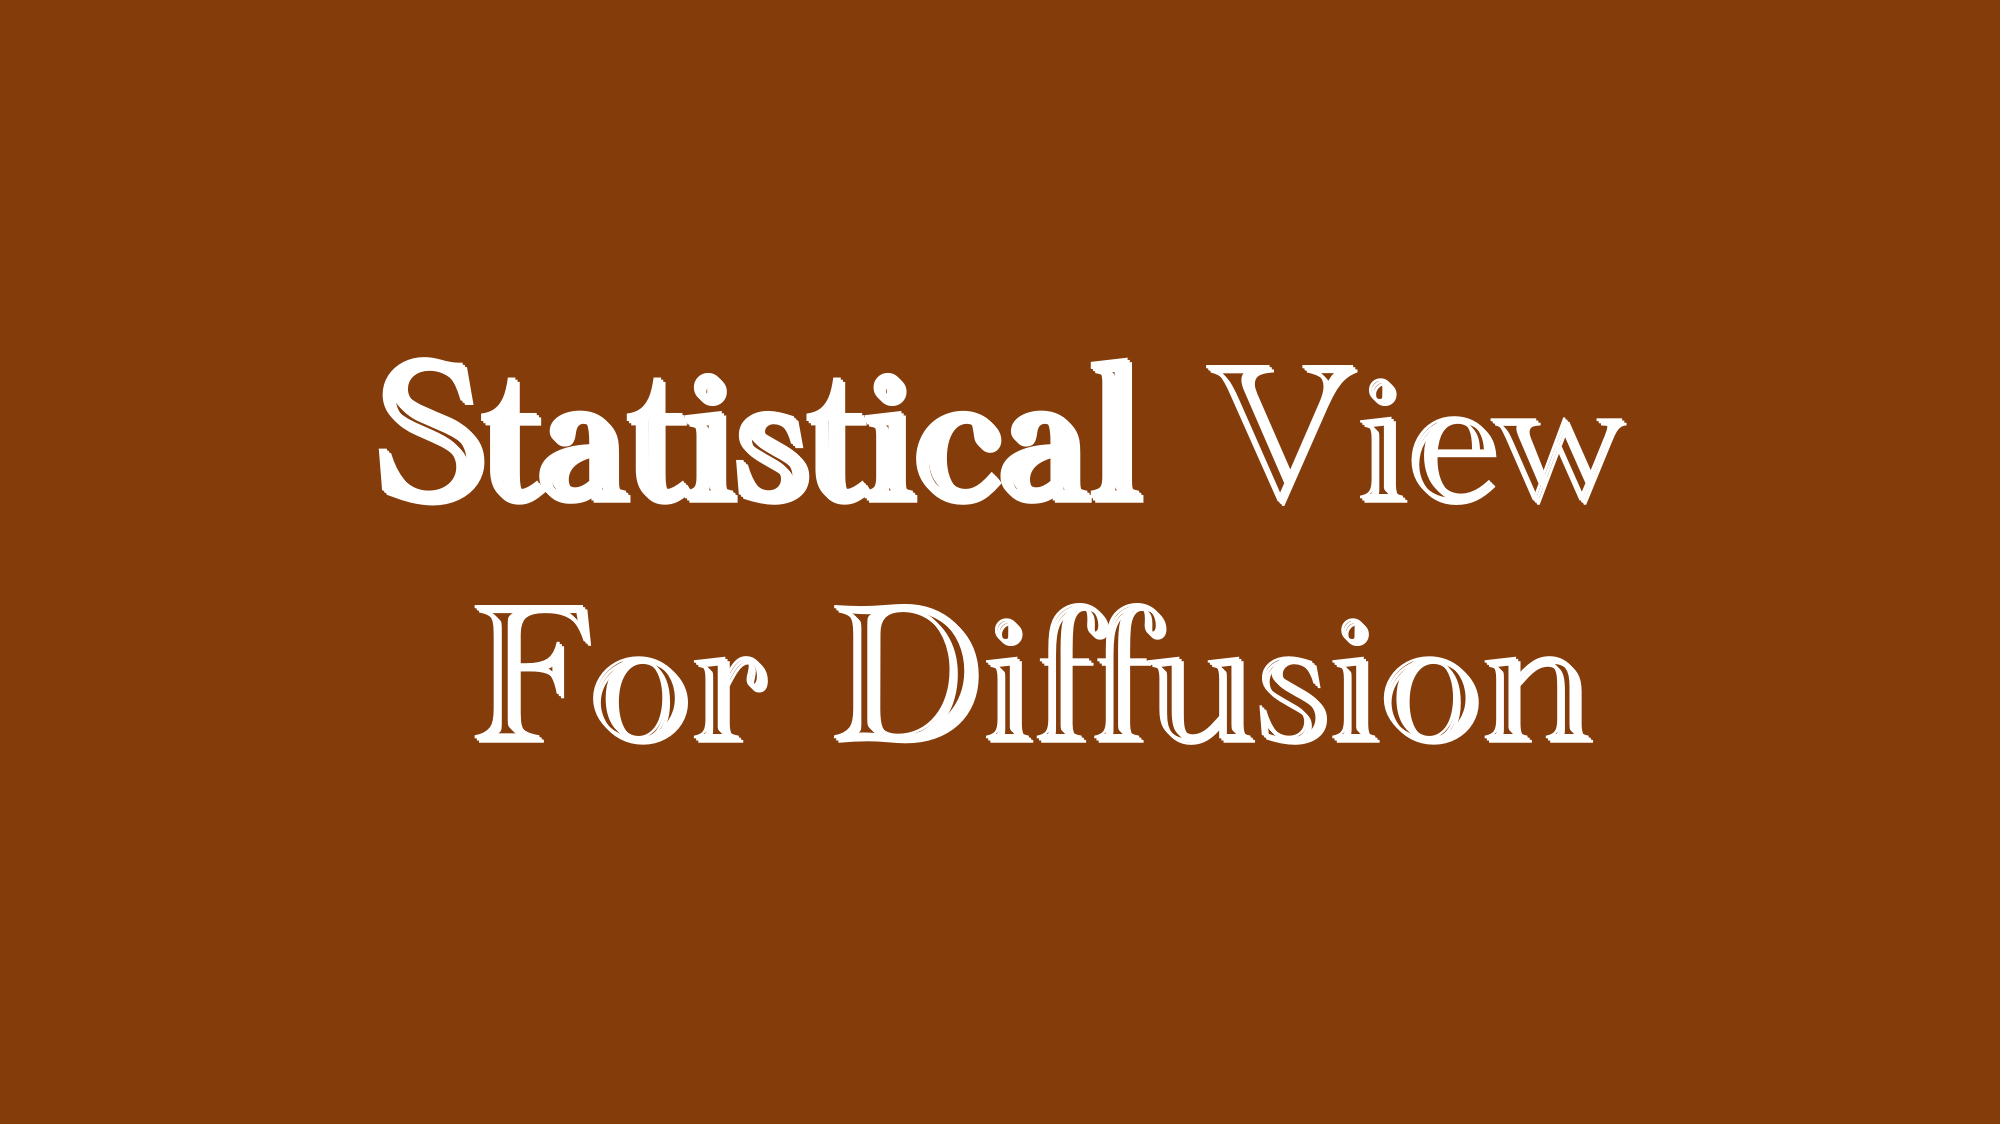 Statistical View for Diffusion